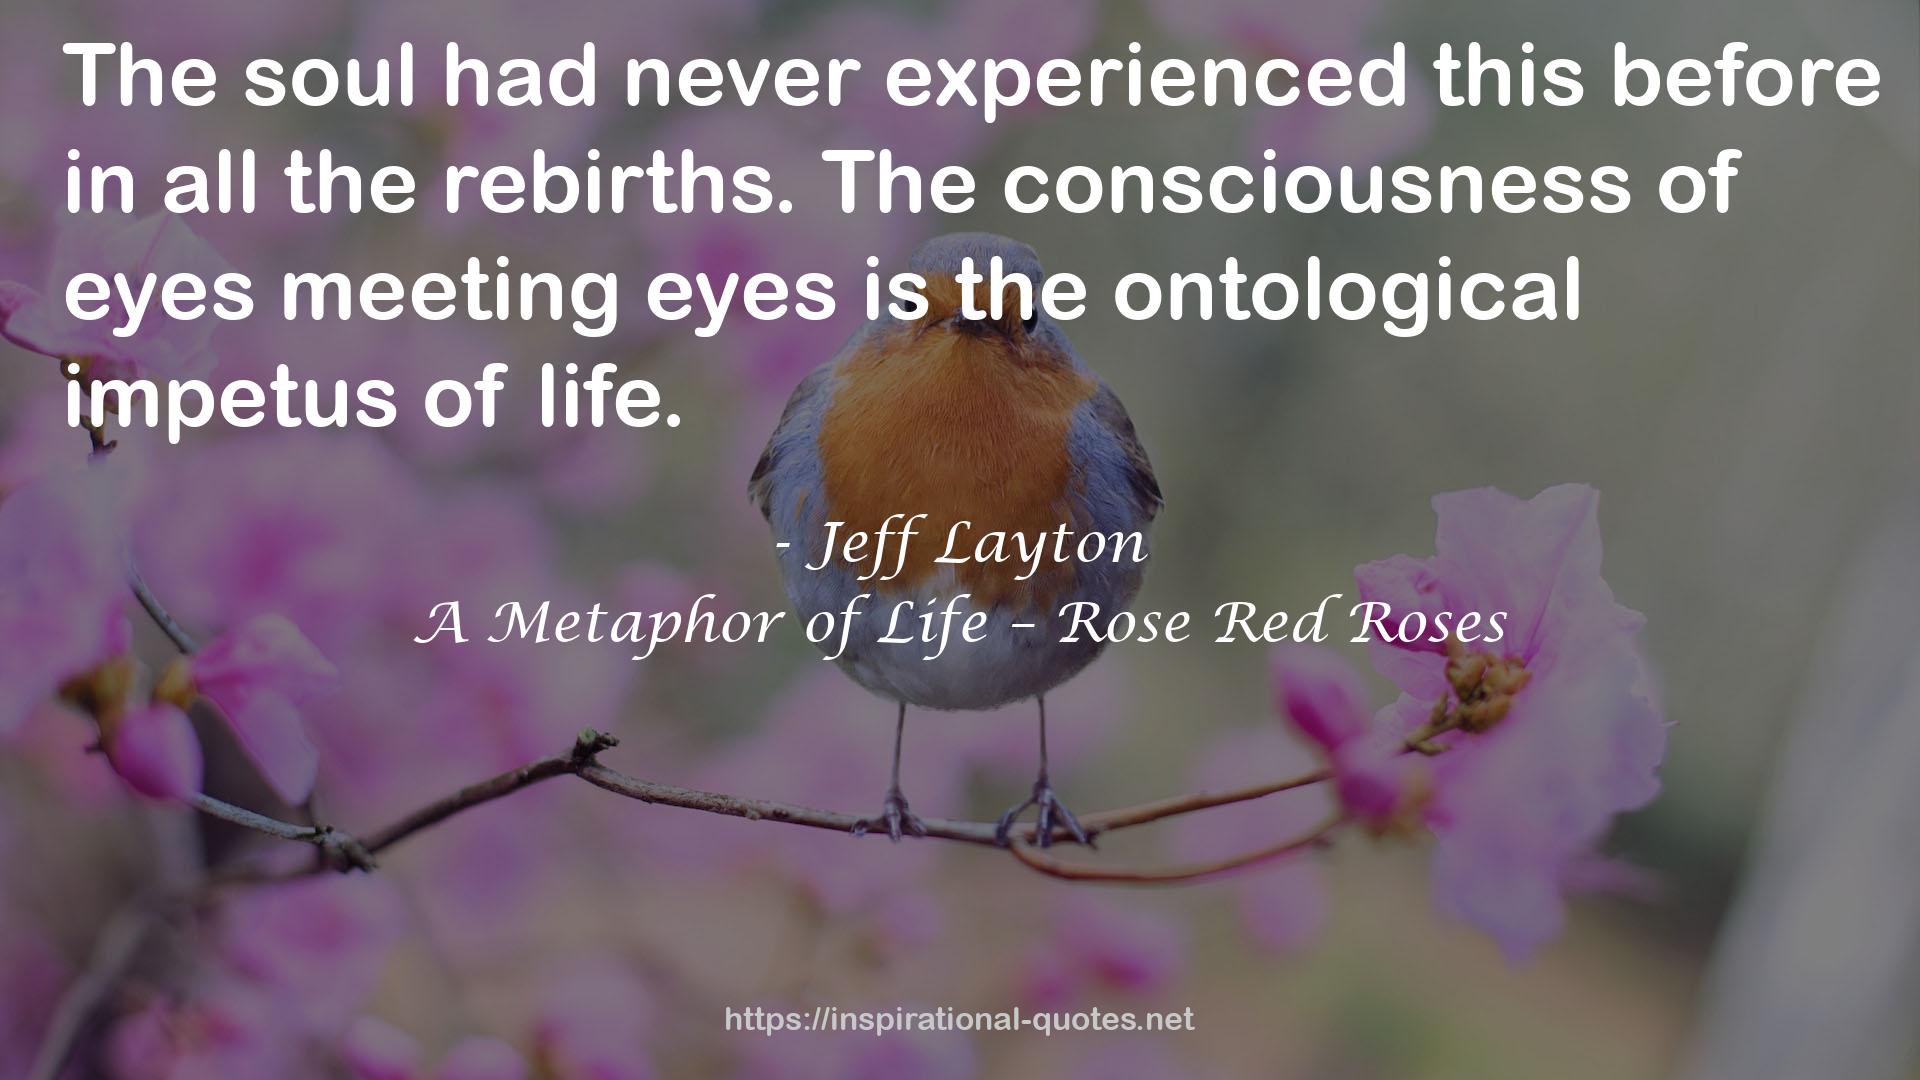 A Metaphor of Life – Rose Red Roses QUOTES